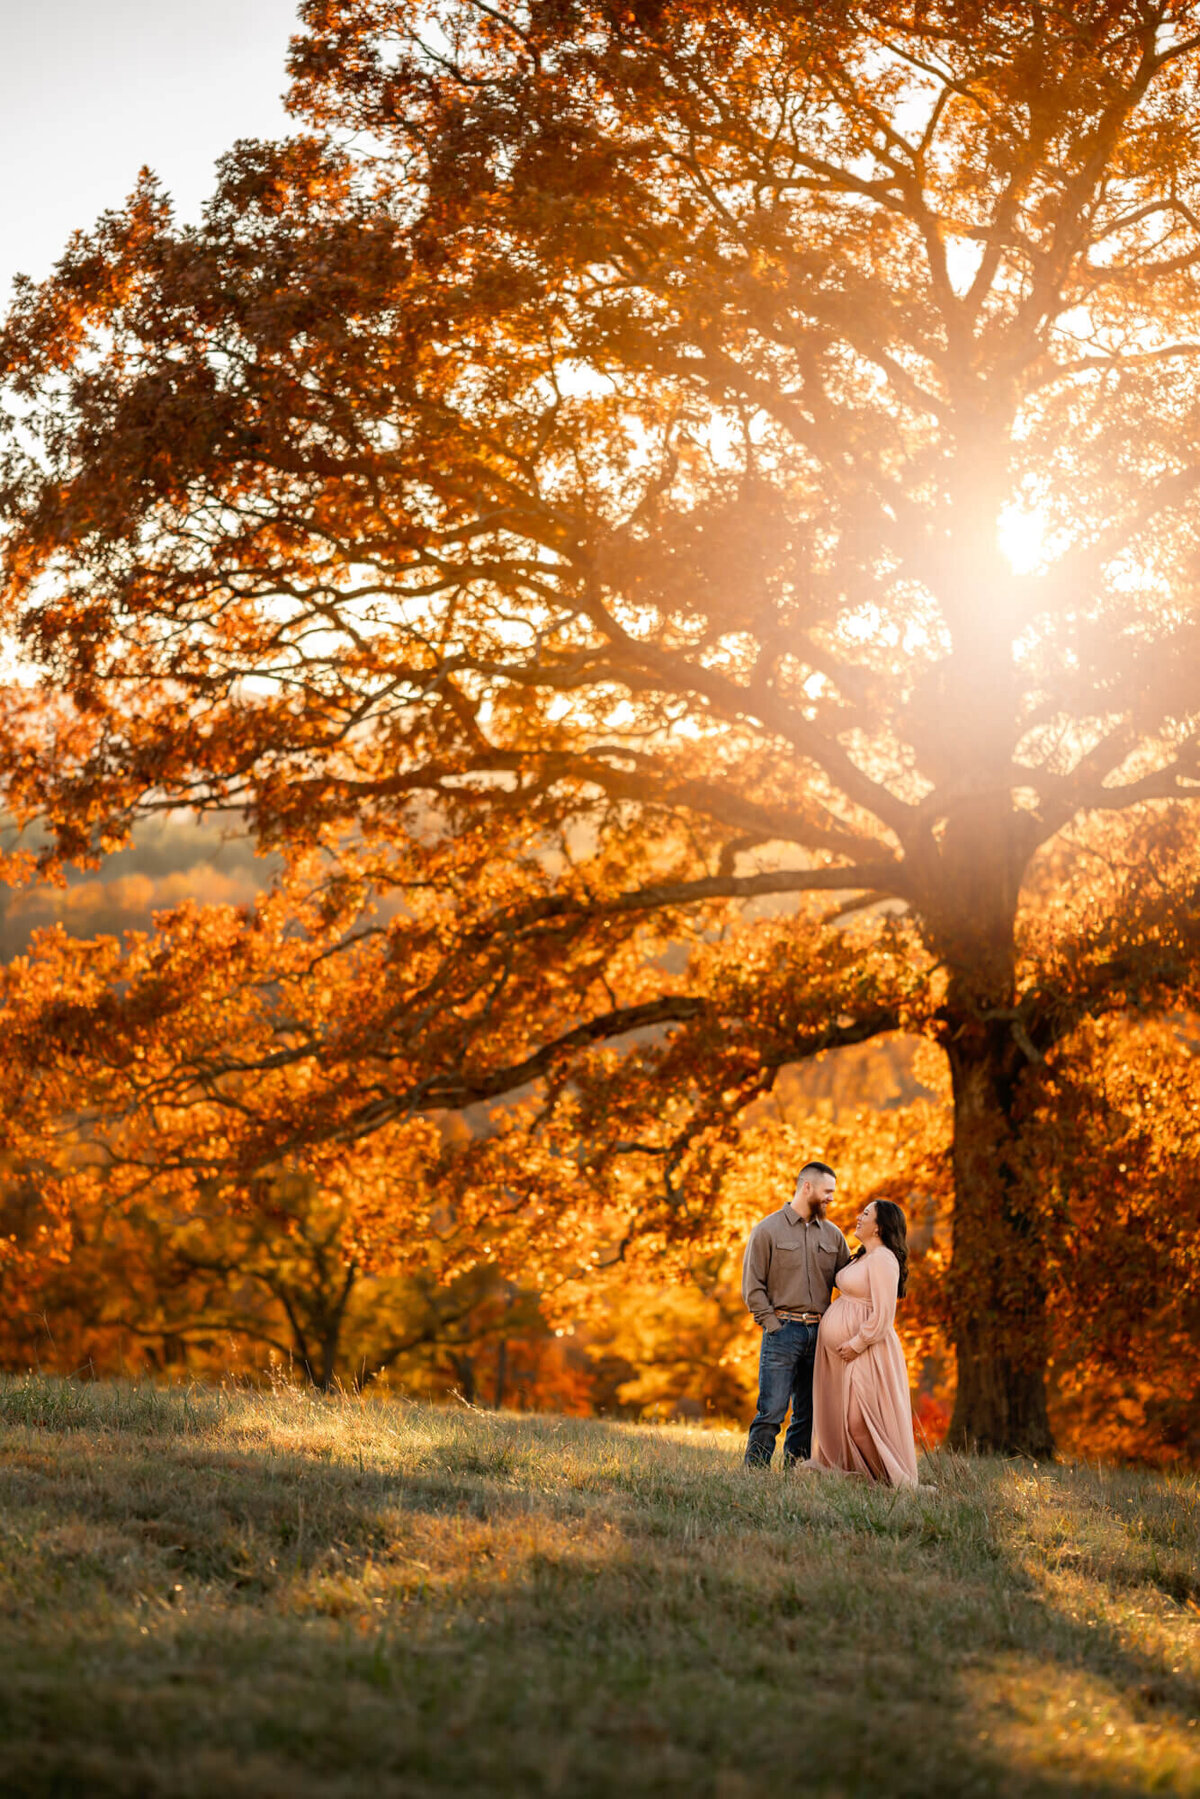 An Expecting couple cuddles and laughs while standing in front of a large tree during the fall as the sun sets behind them